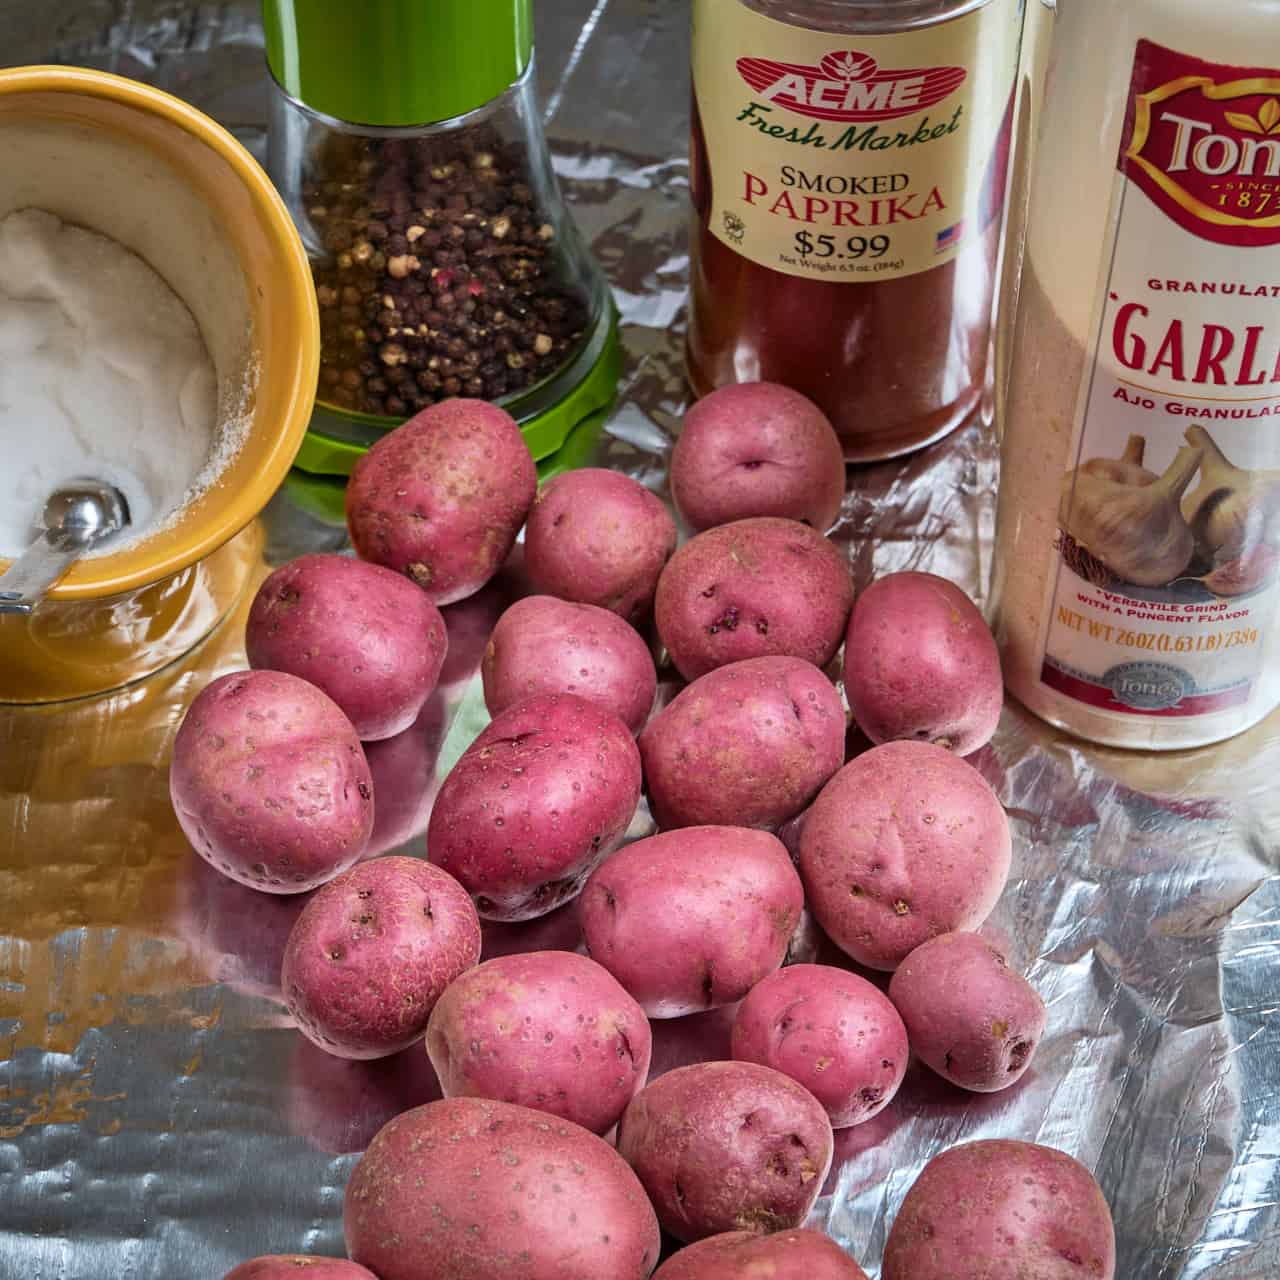 Ingredients for grilled baby potatoes in foil